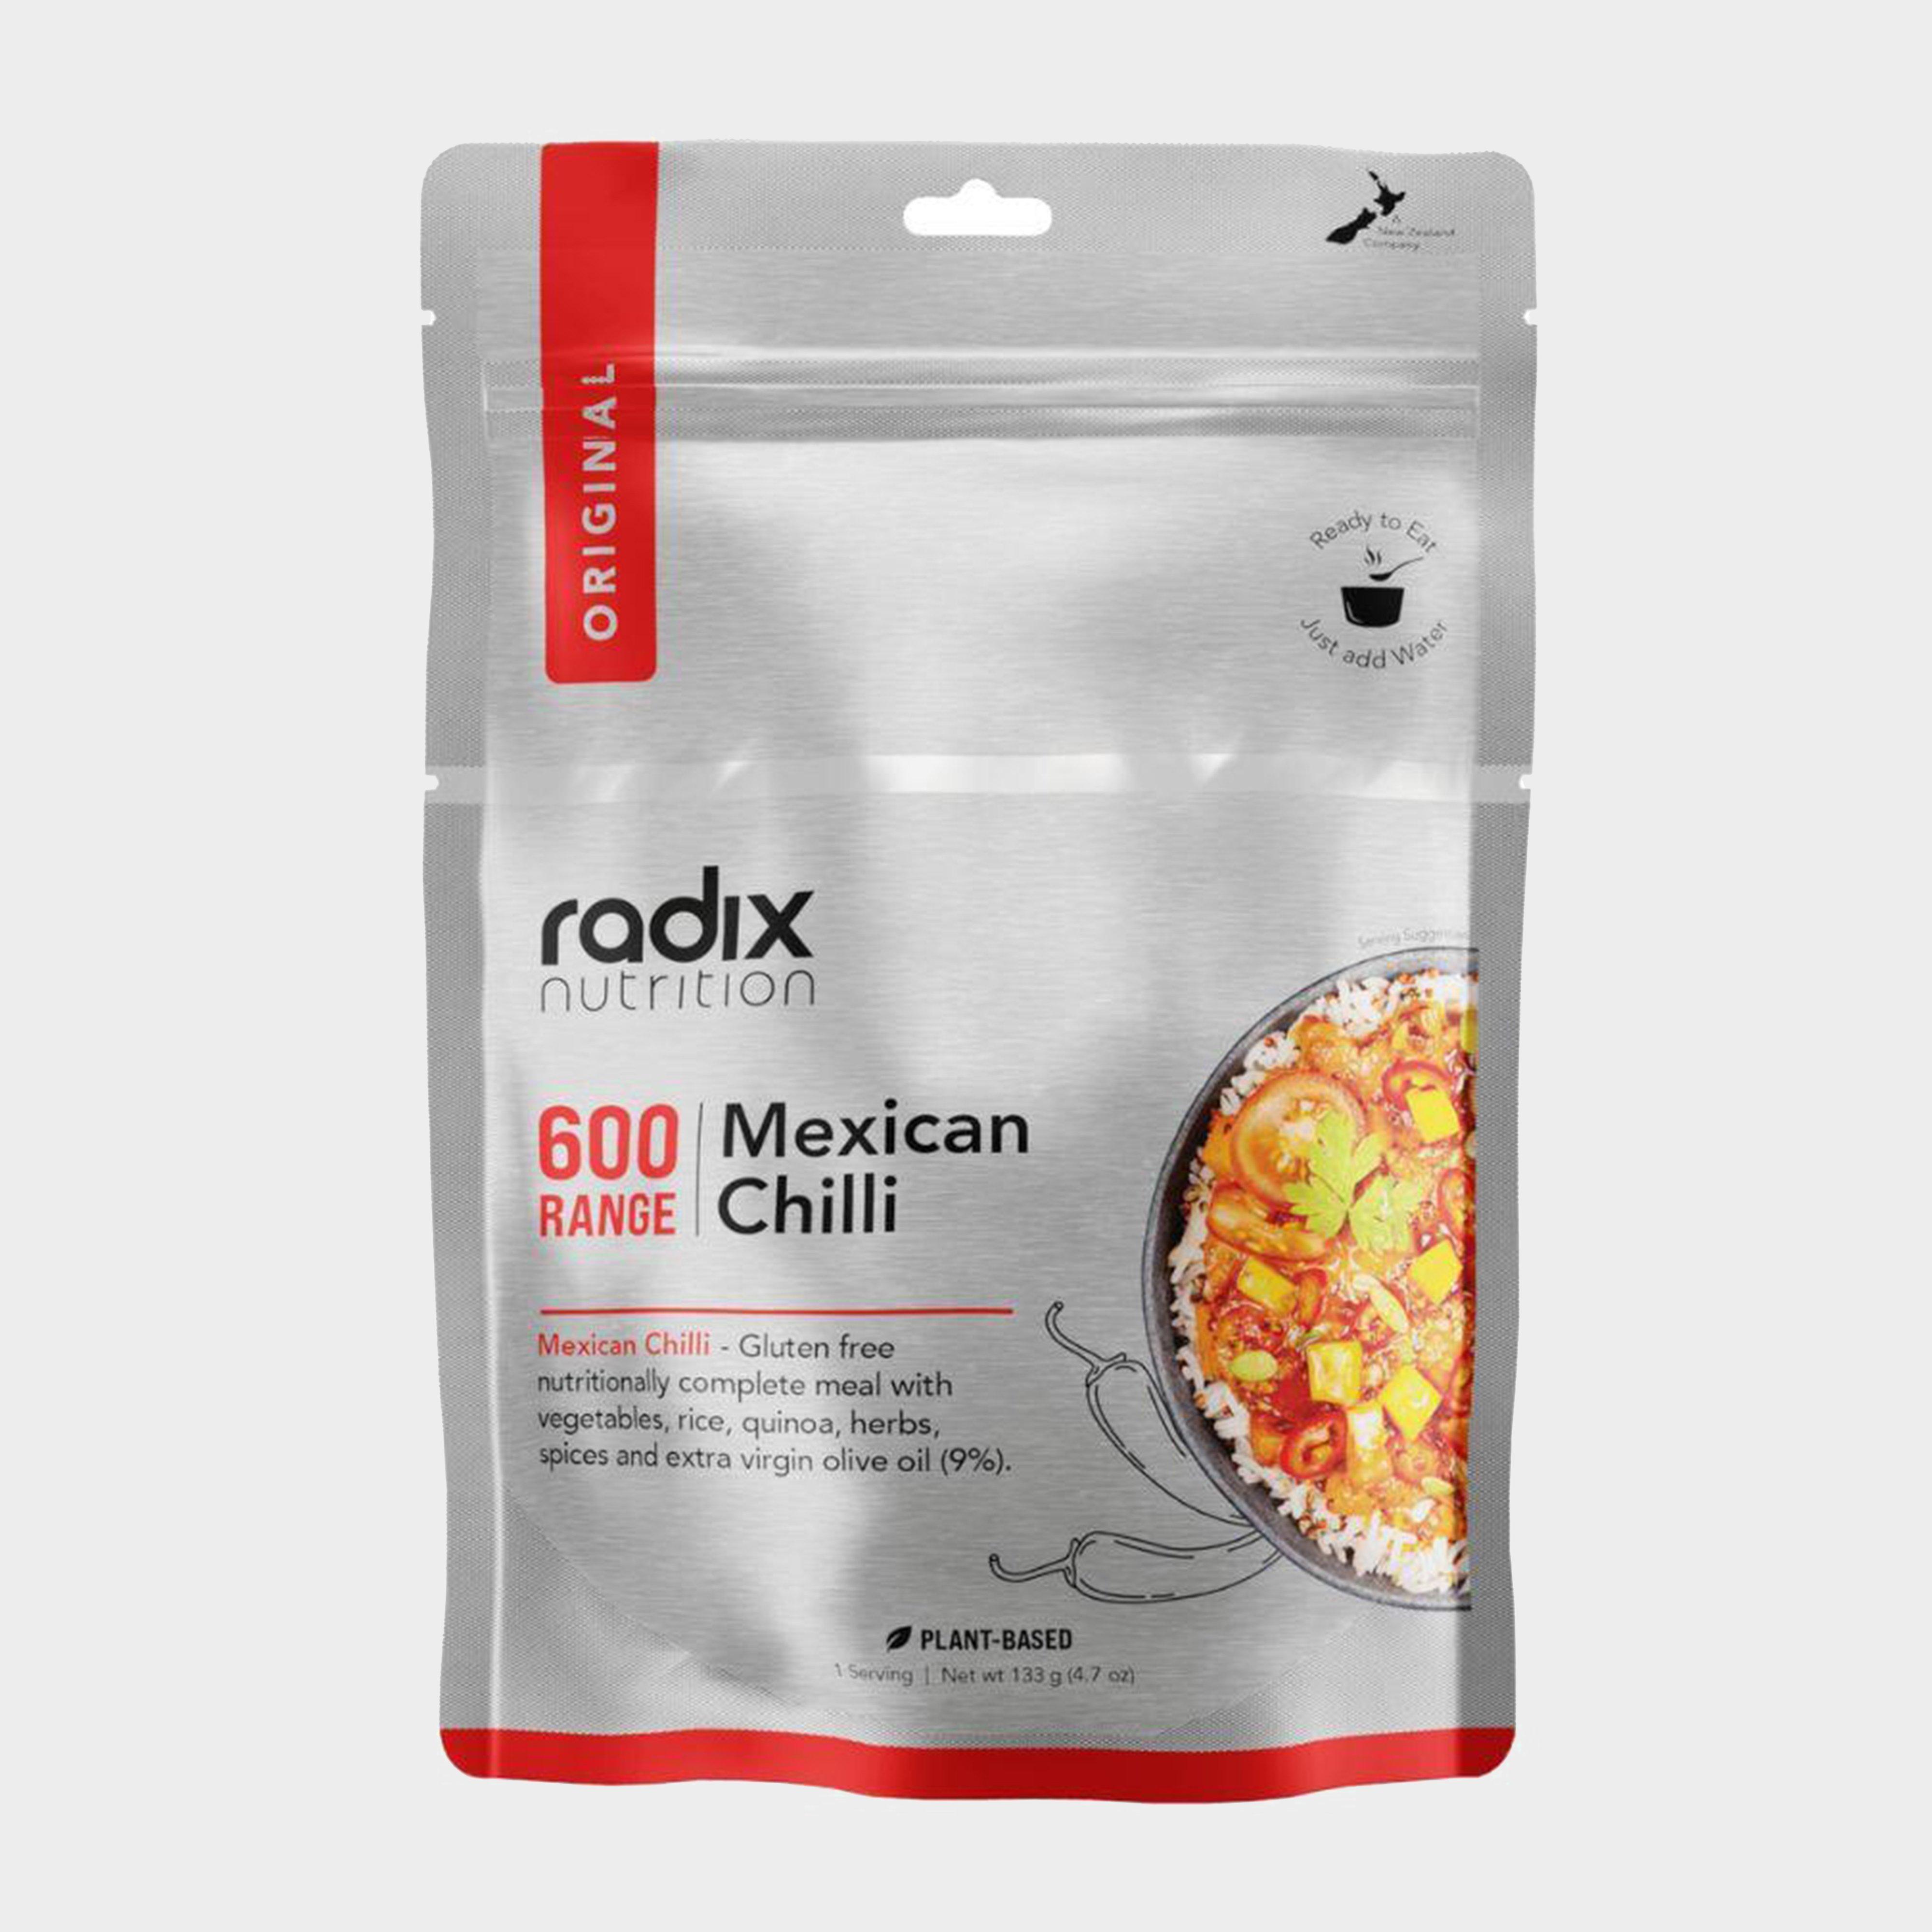 Image of Radix Original Mexican Chilli Meal 600Kcal, 600